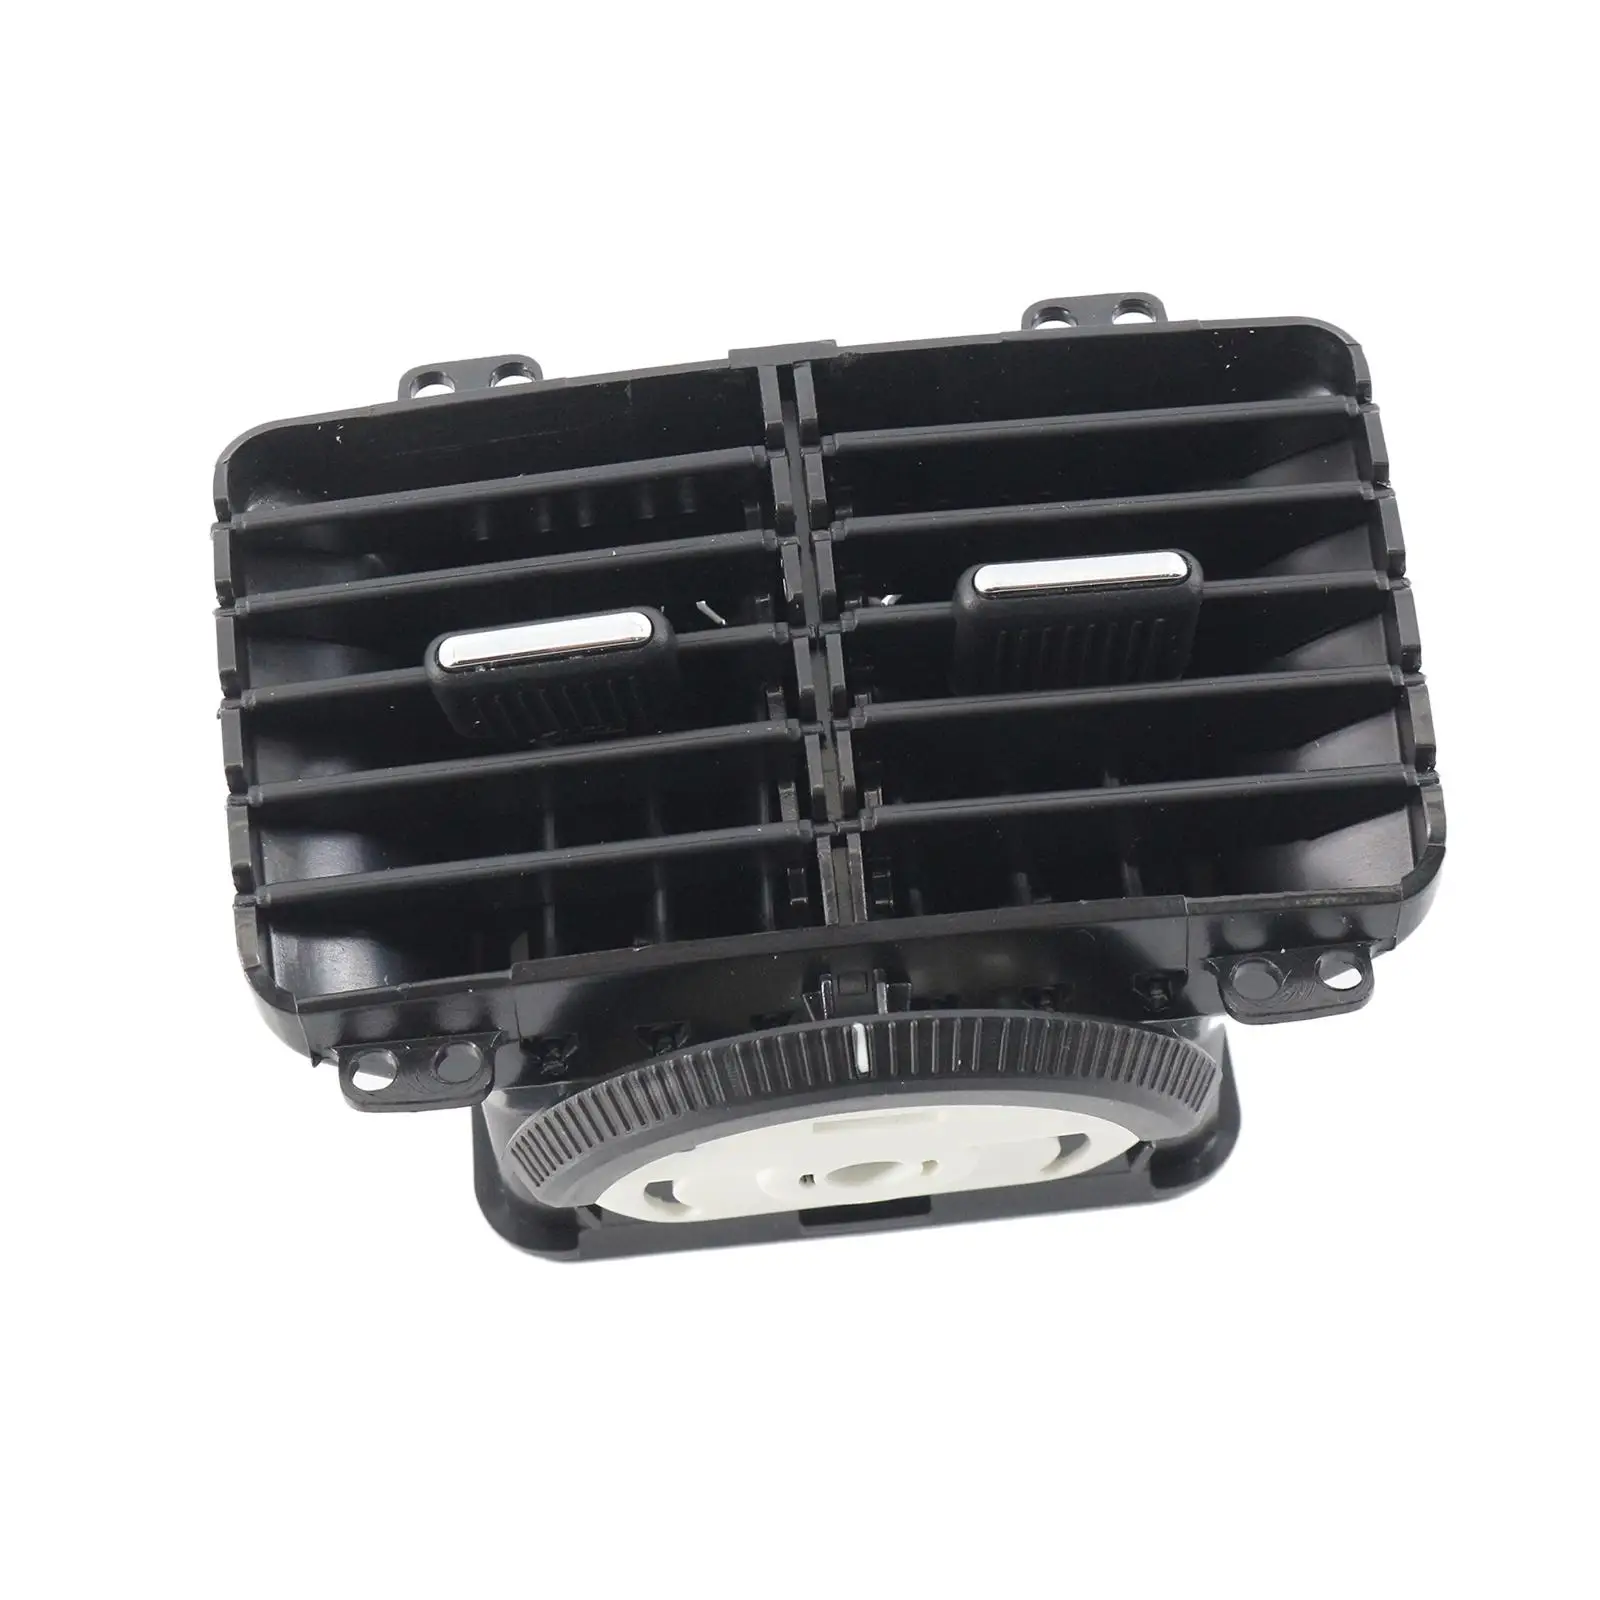 Car Rear Air Outlet Ventilation 1KD819203A 1K0819203A 1KD 819 203 for VW Golf MK5 MK6 Jetta Rabbit Replacement Durable